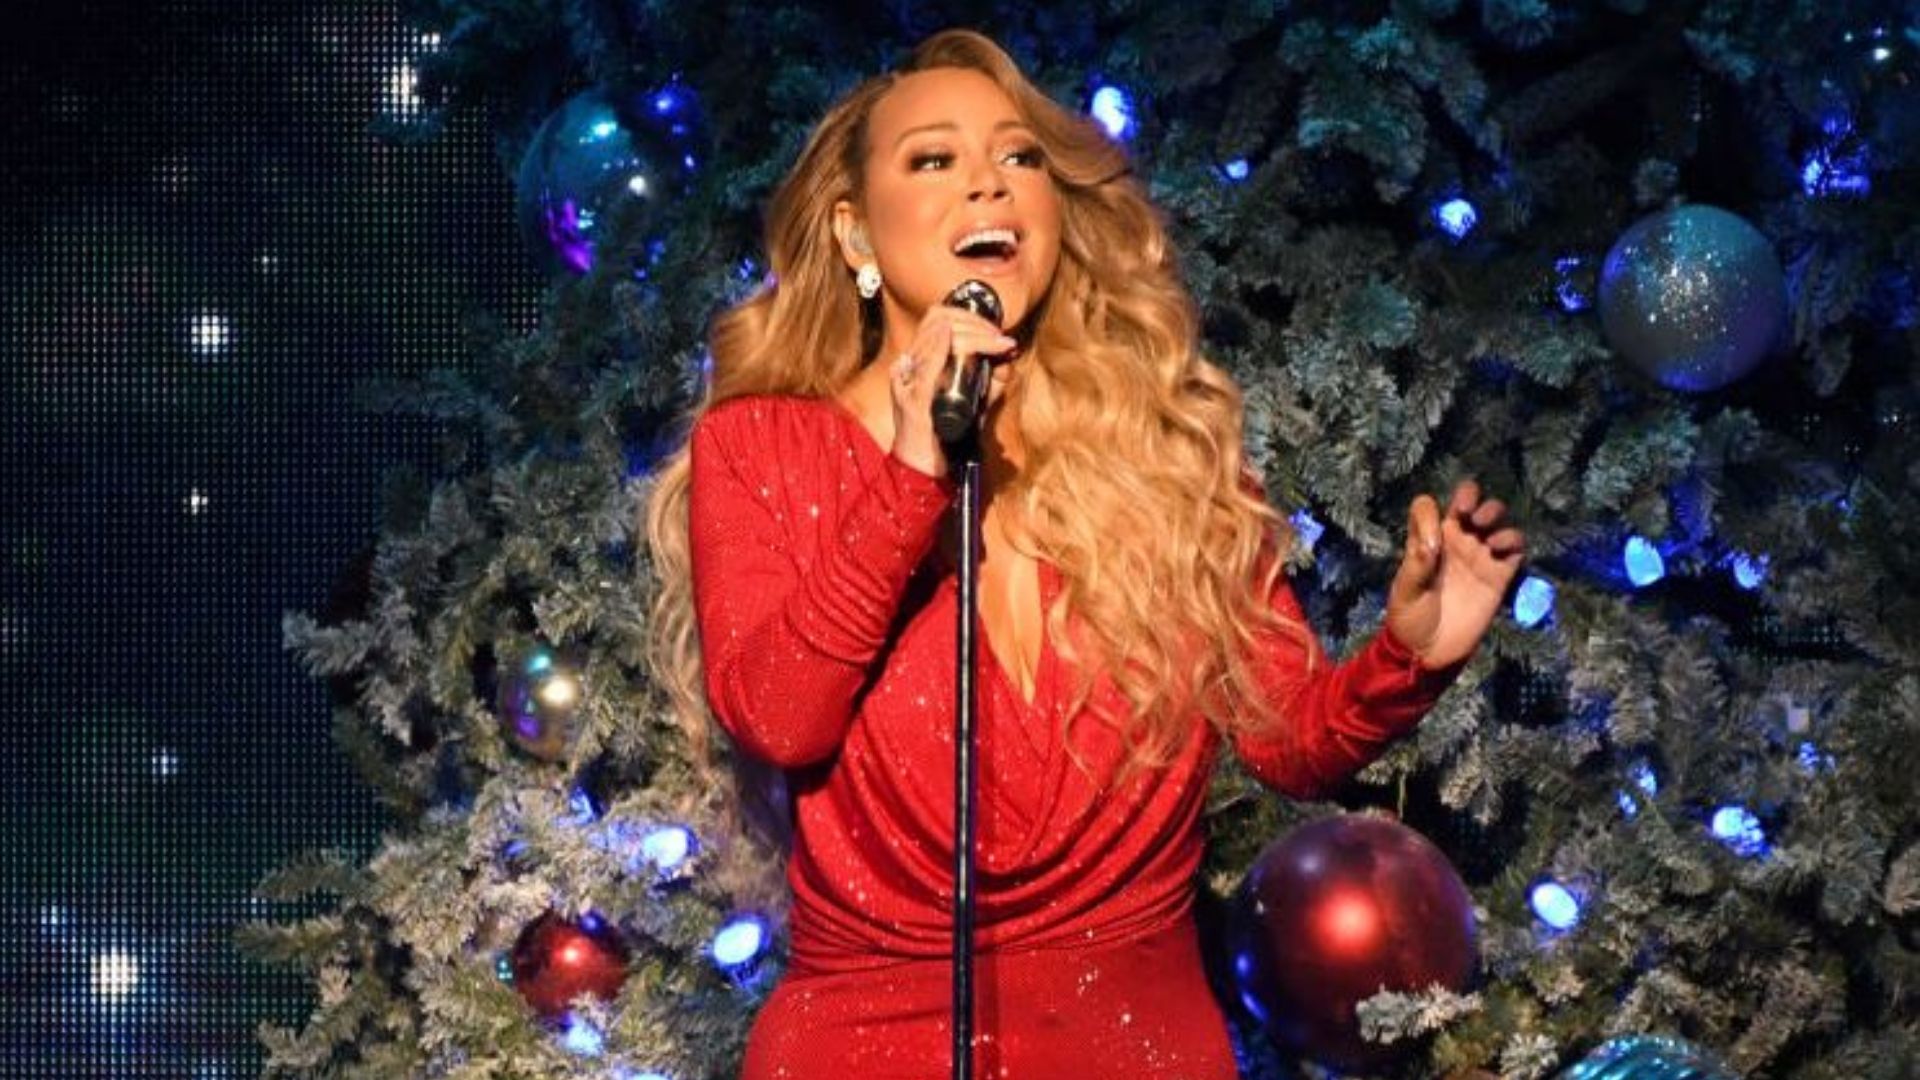 After 25 Years Mariah Careys “all I Want For Christmas Is You” Hits No 1 On The Billboard Hot 100 